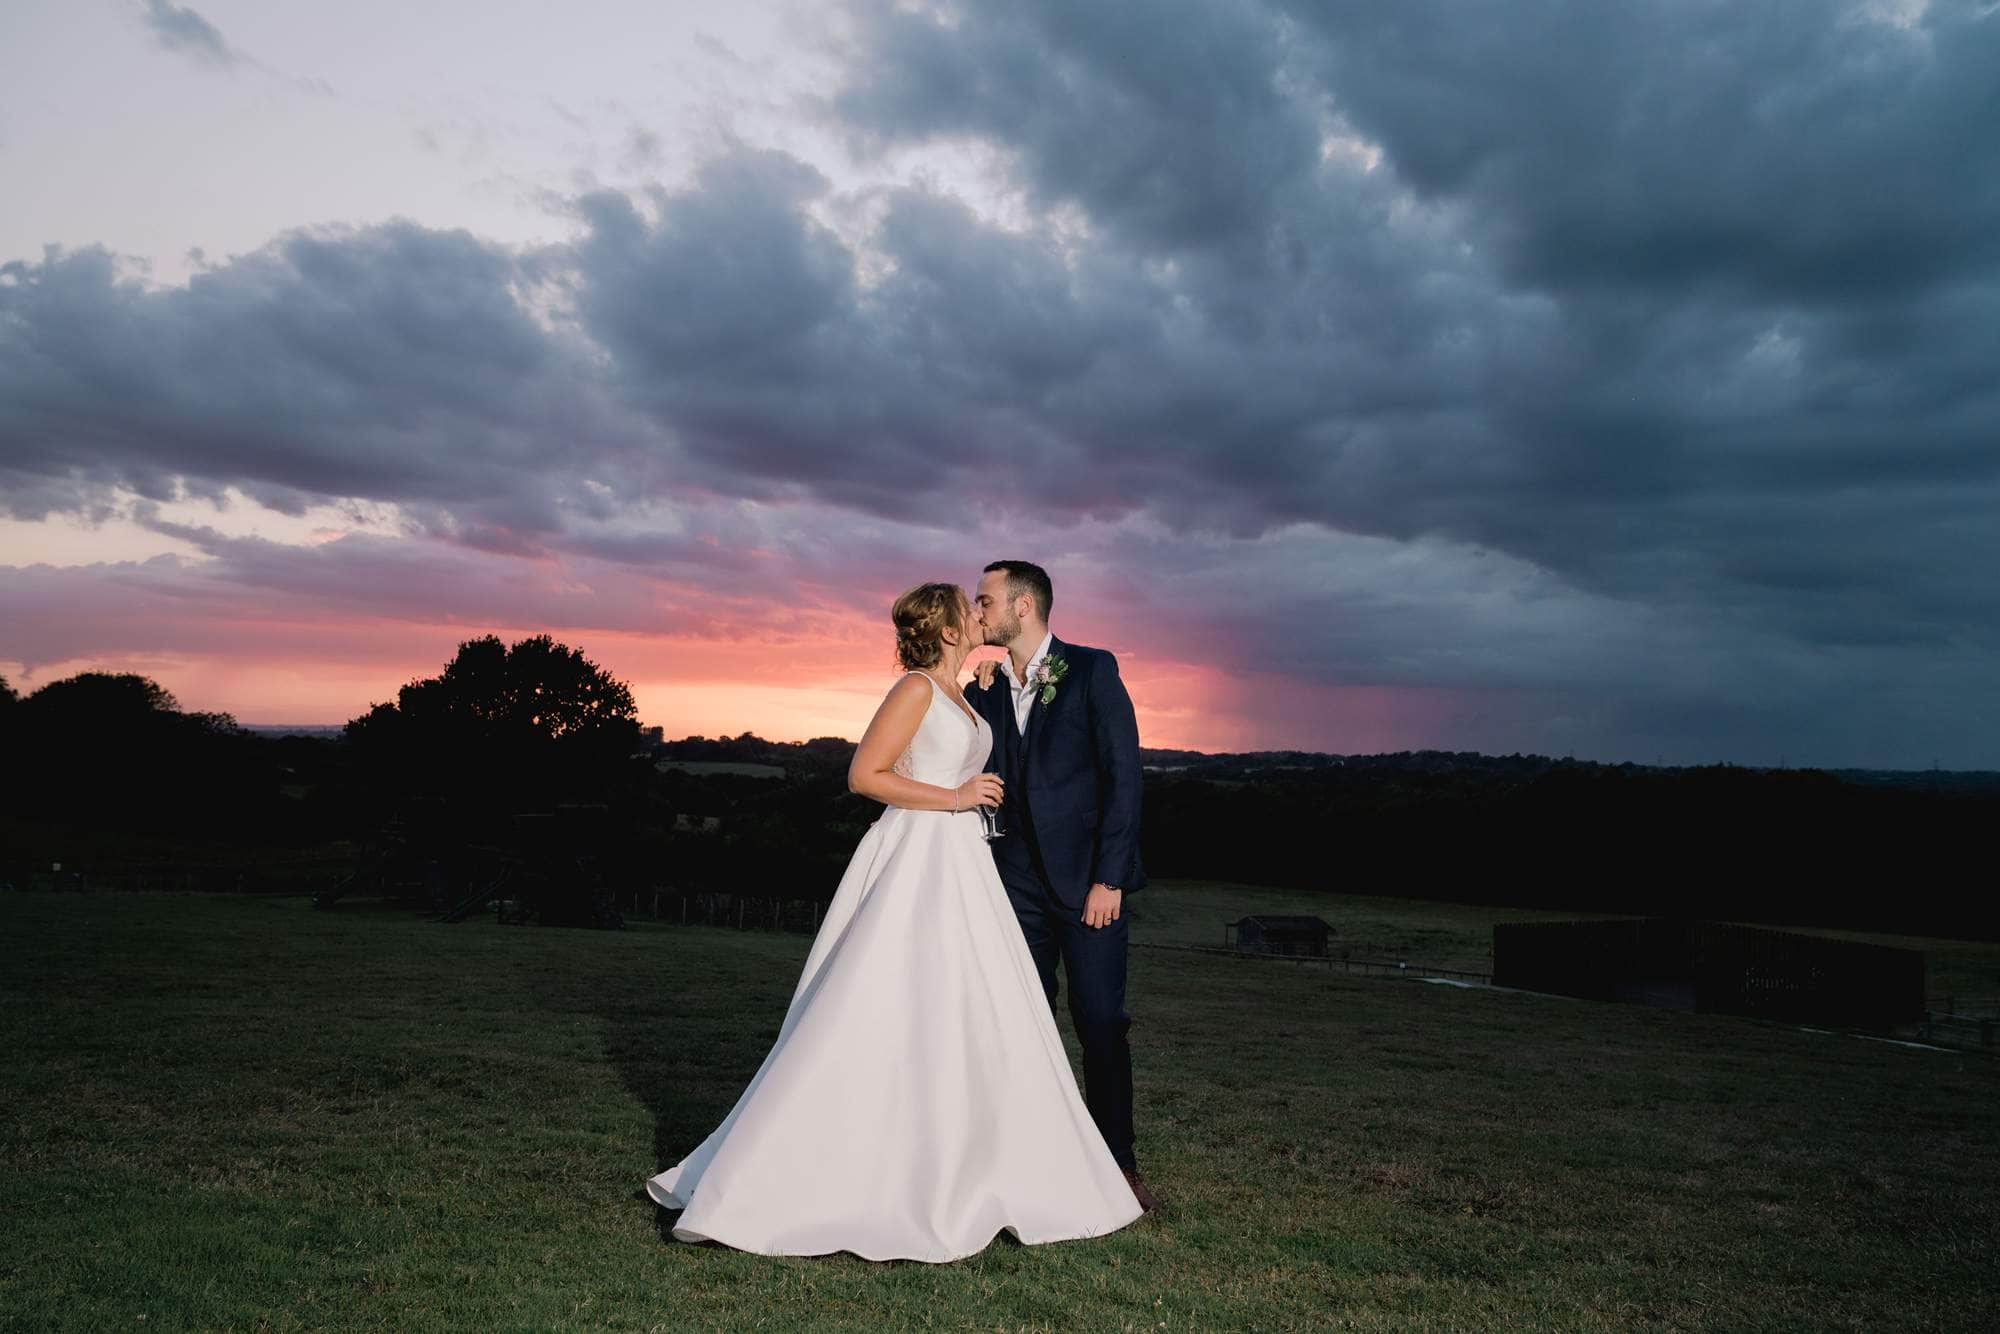 Blackstock Country Estate in Sussex Amazing Sunset with Bride and Groom